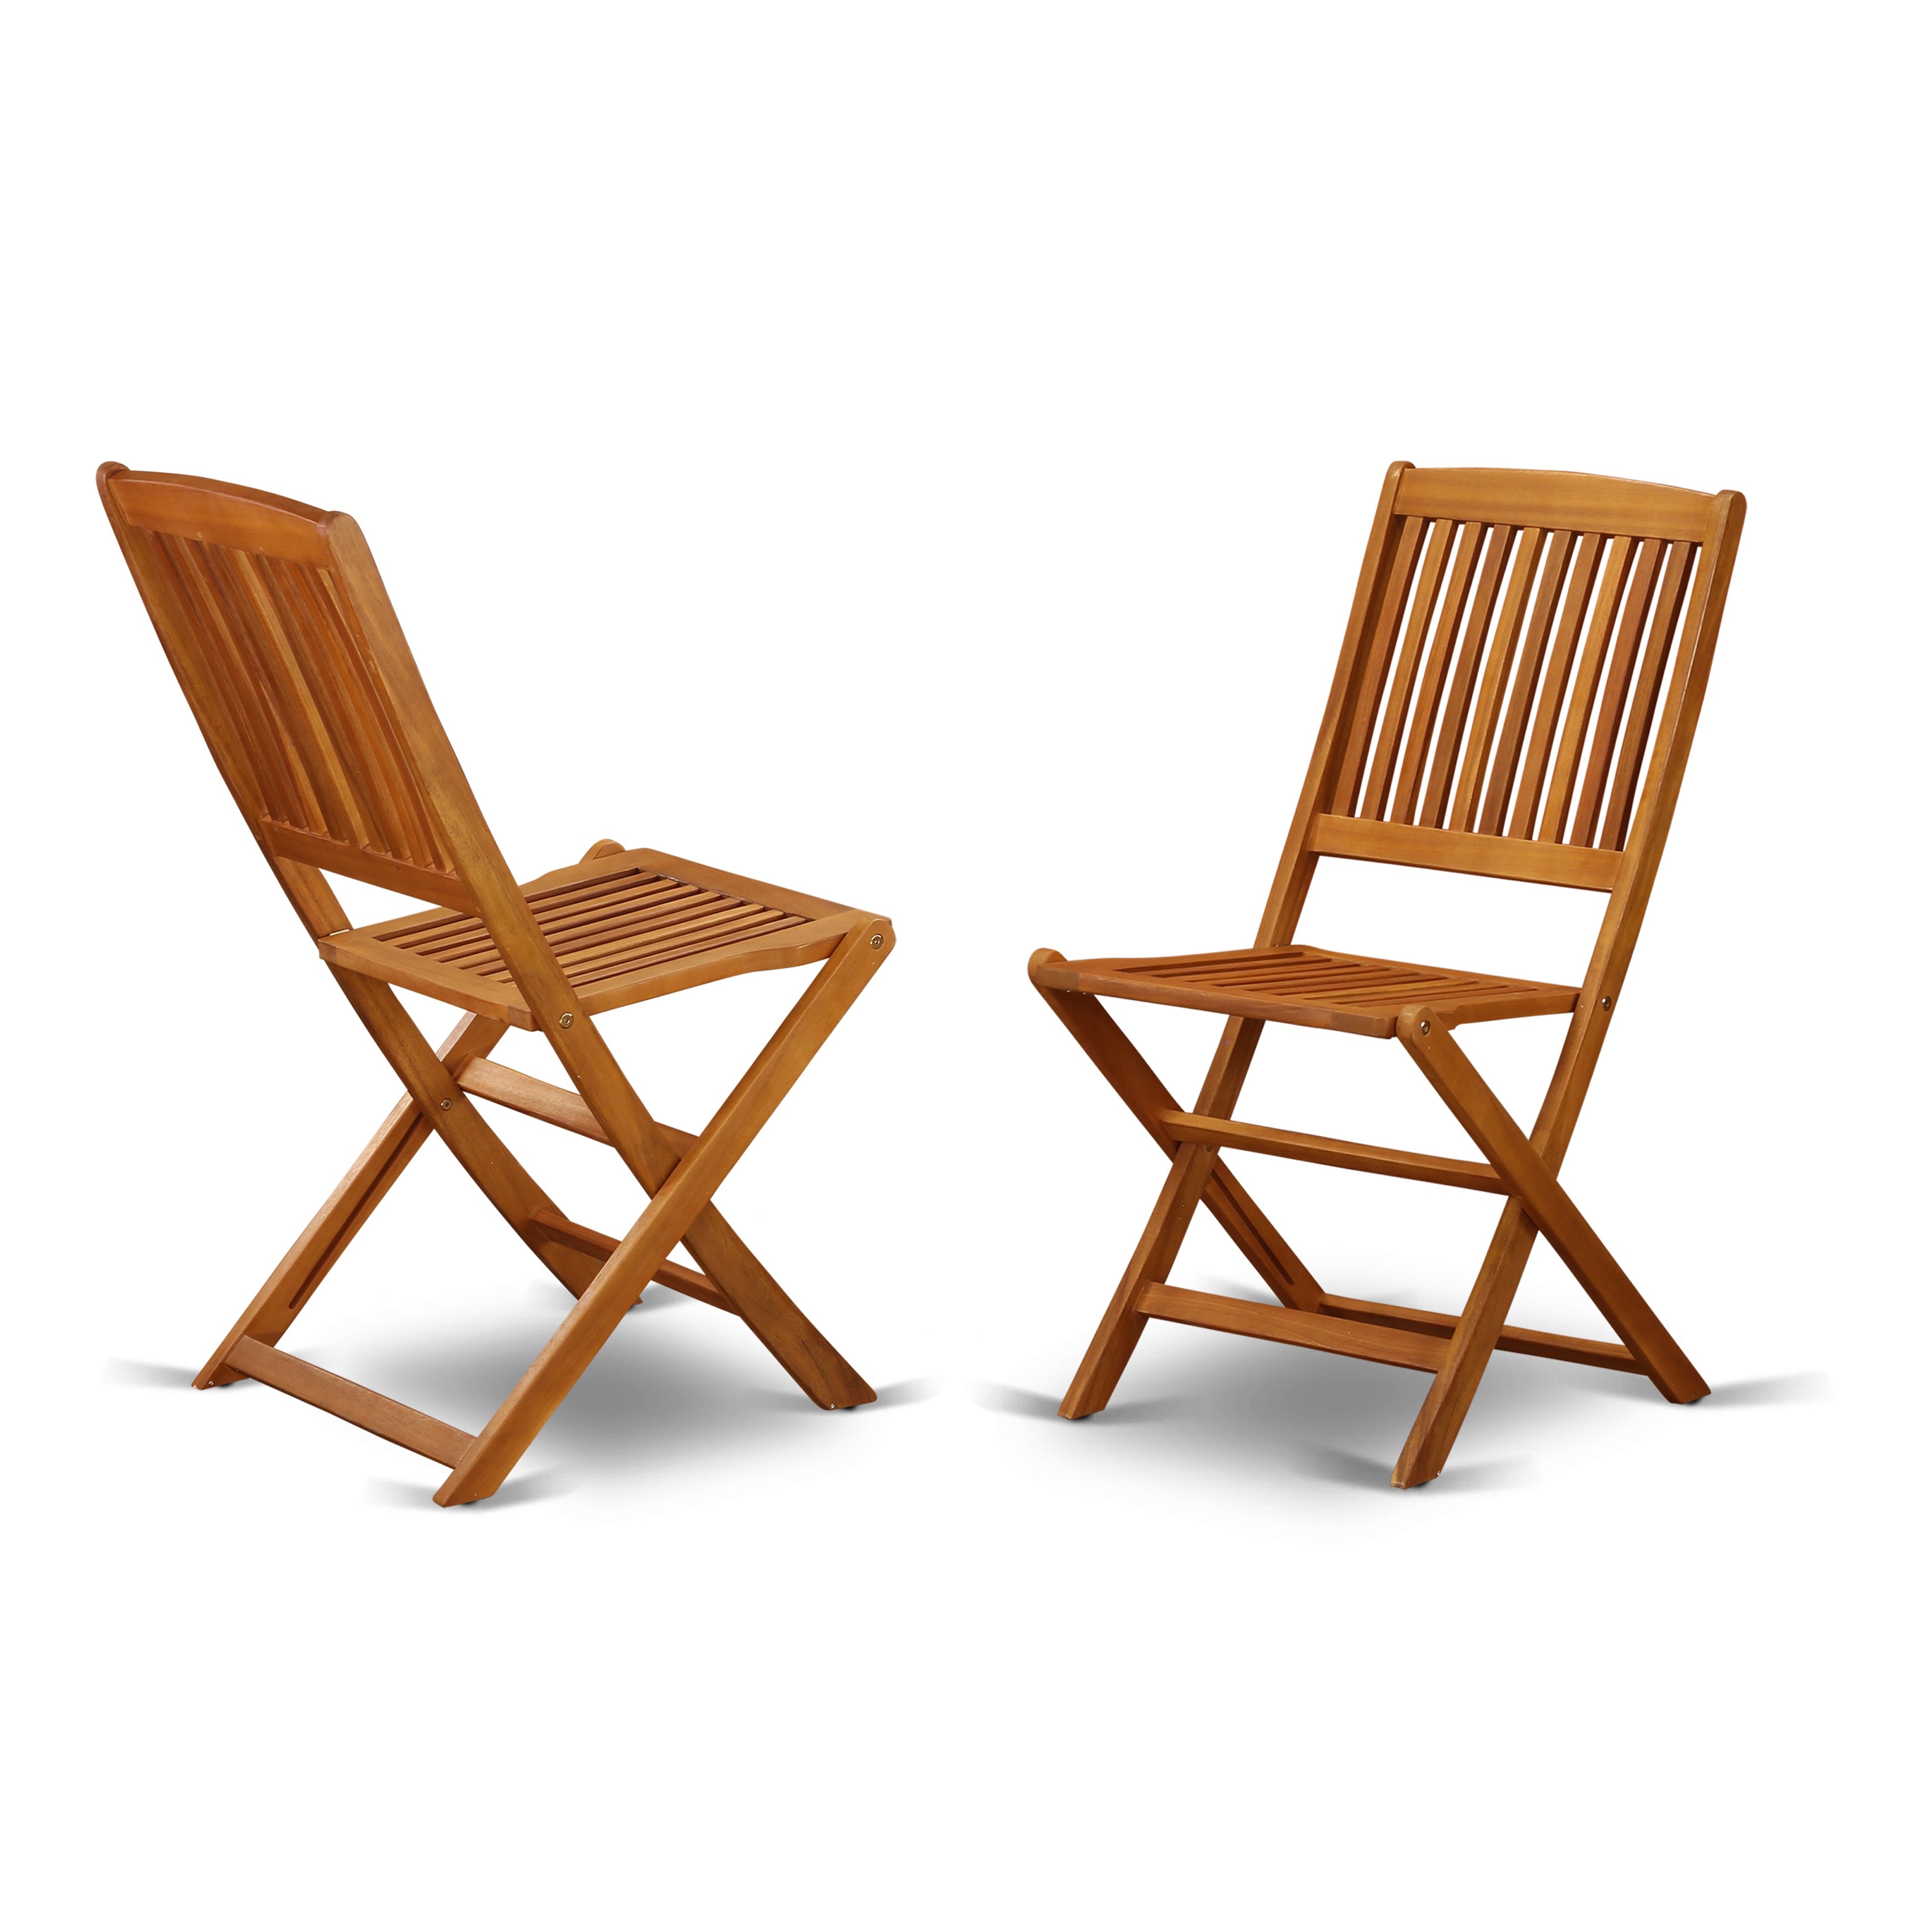 Cameron Patio Folding Chairs in Natural Oil (Set of 2)